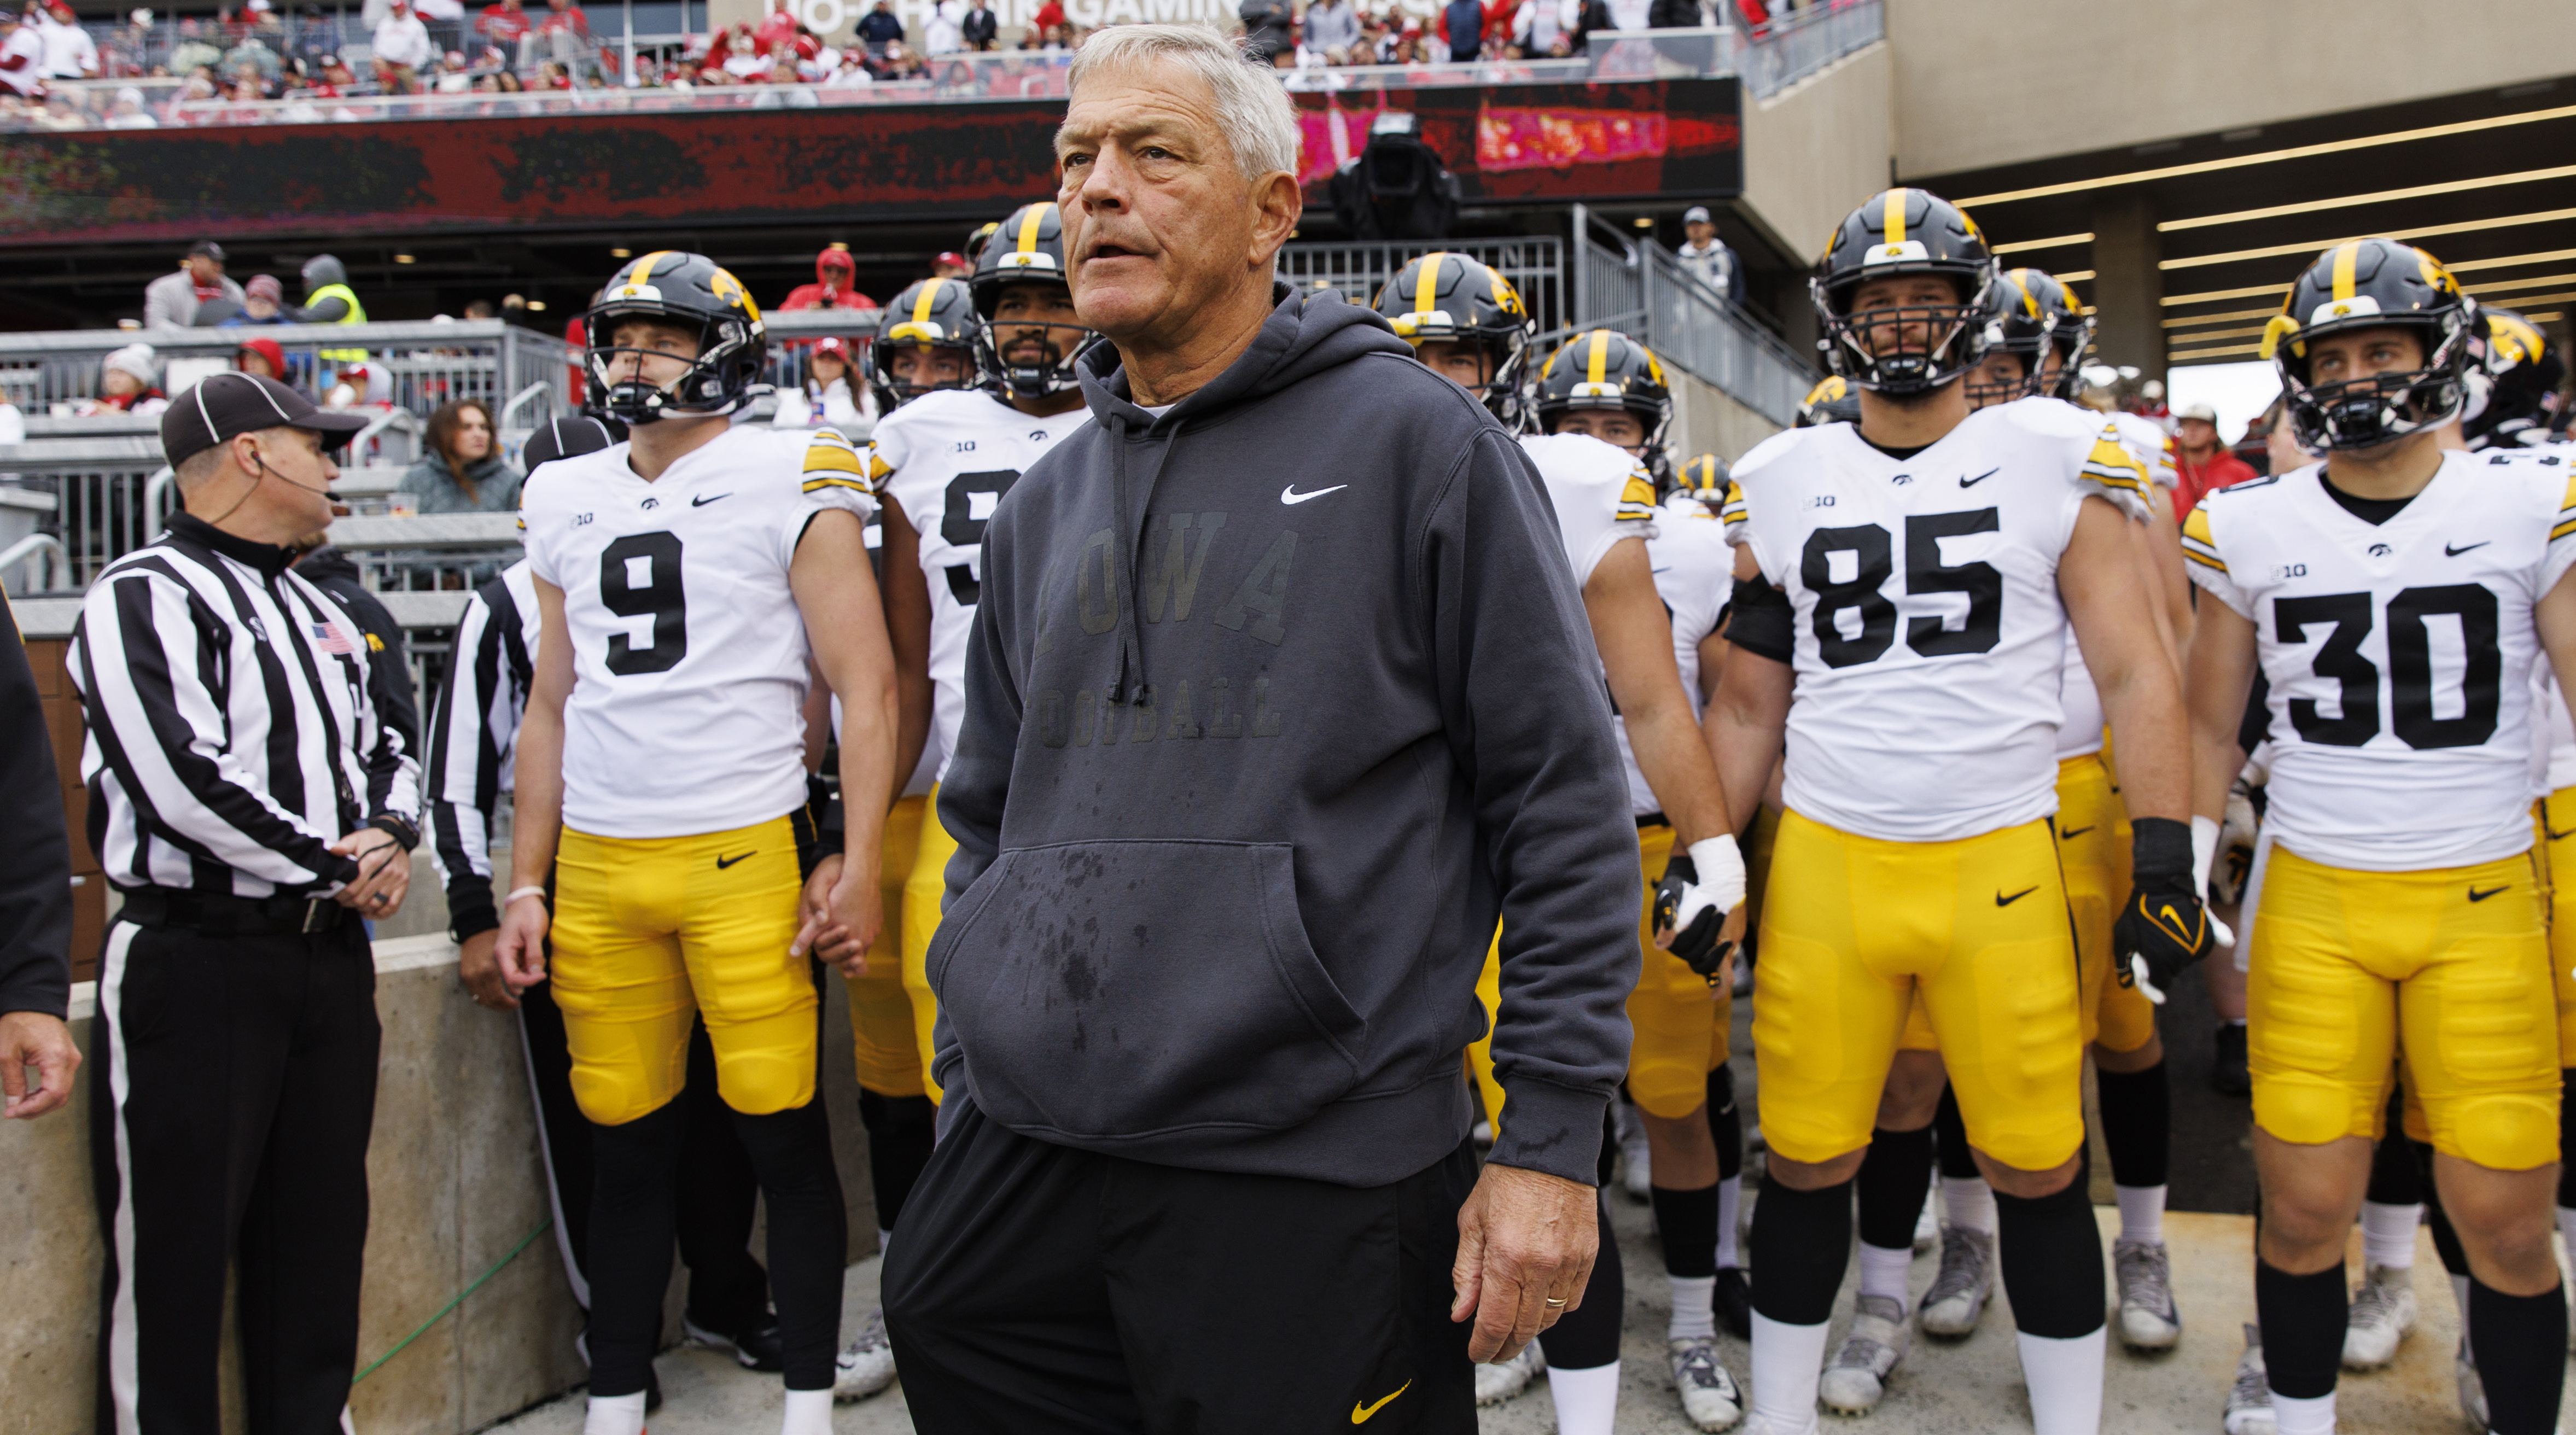 Iowa Hawkeyes head coach Kirk Ferentz looks on before taking the field with his team behind him.